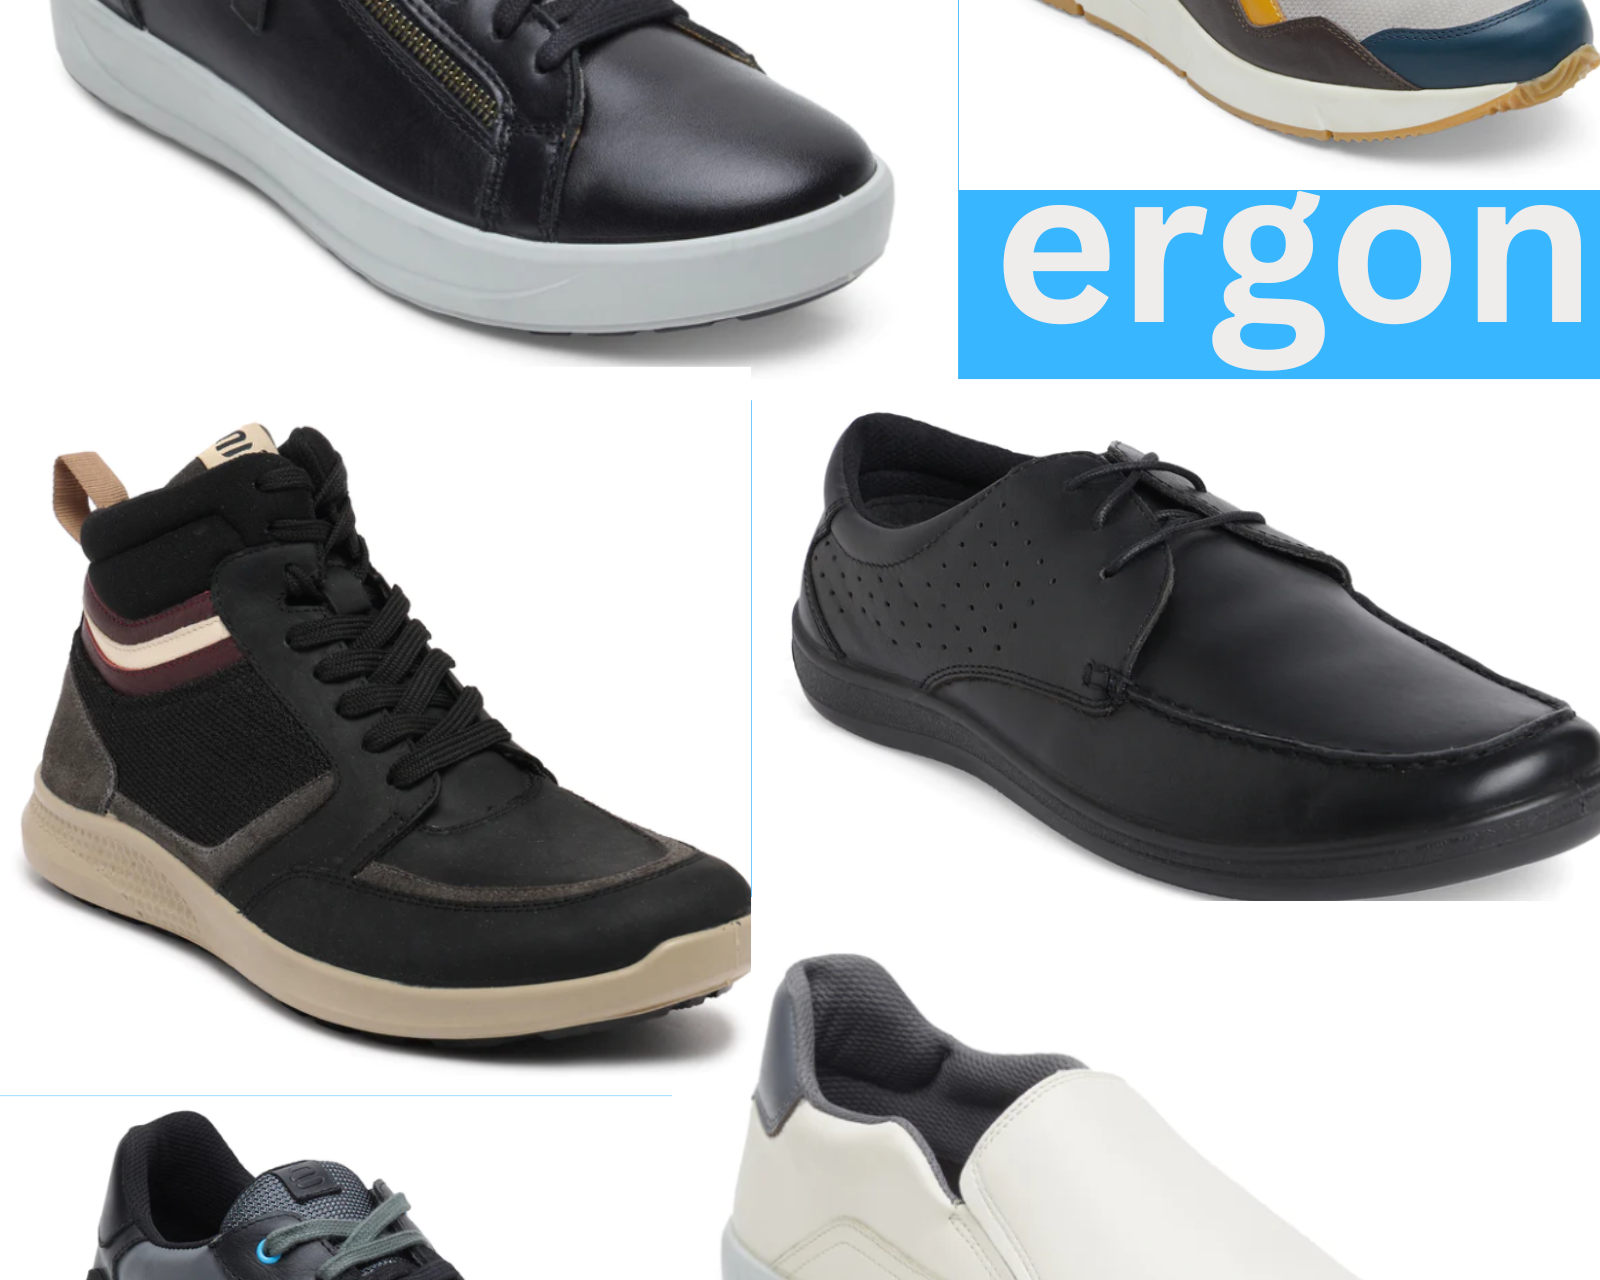 How to choose shoes for every occasion | The Complete Guide to Choosing Shoes for Every Occasion